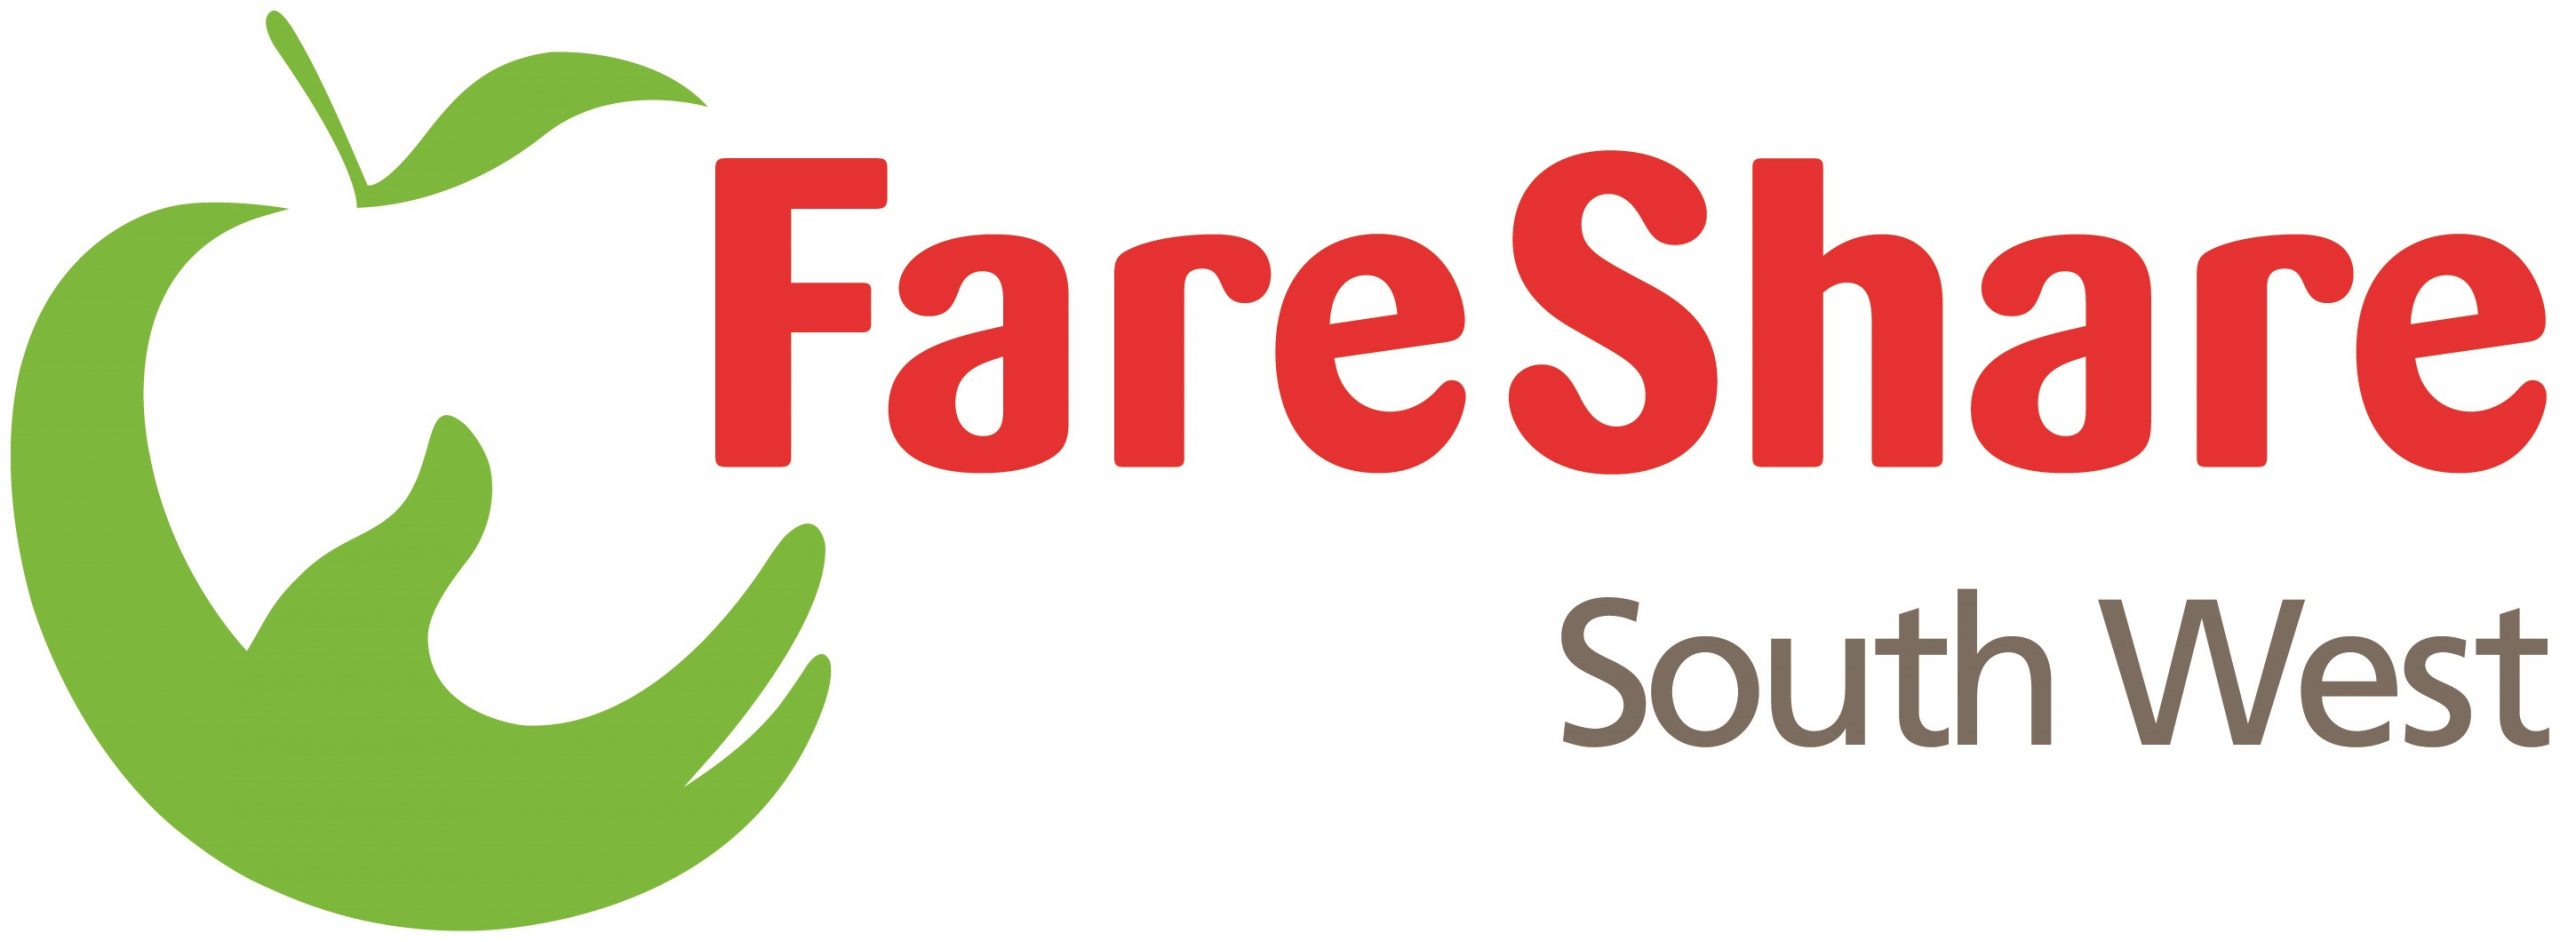 FareShare South West